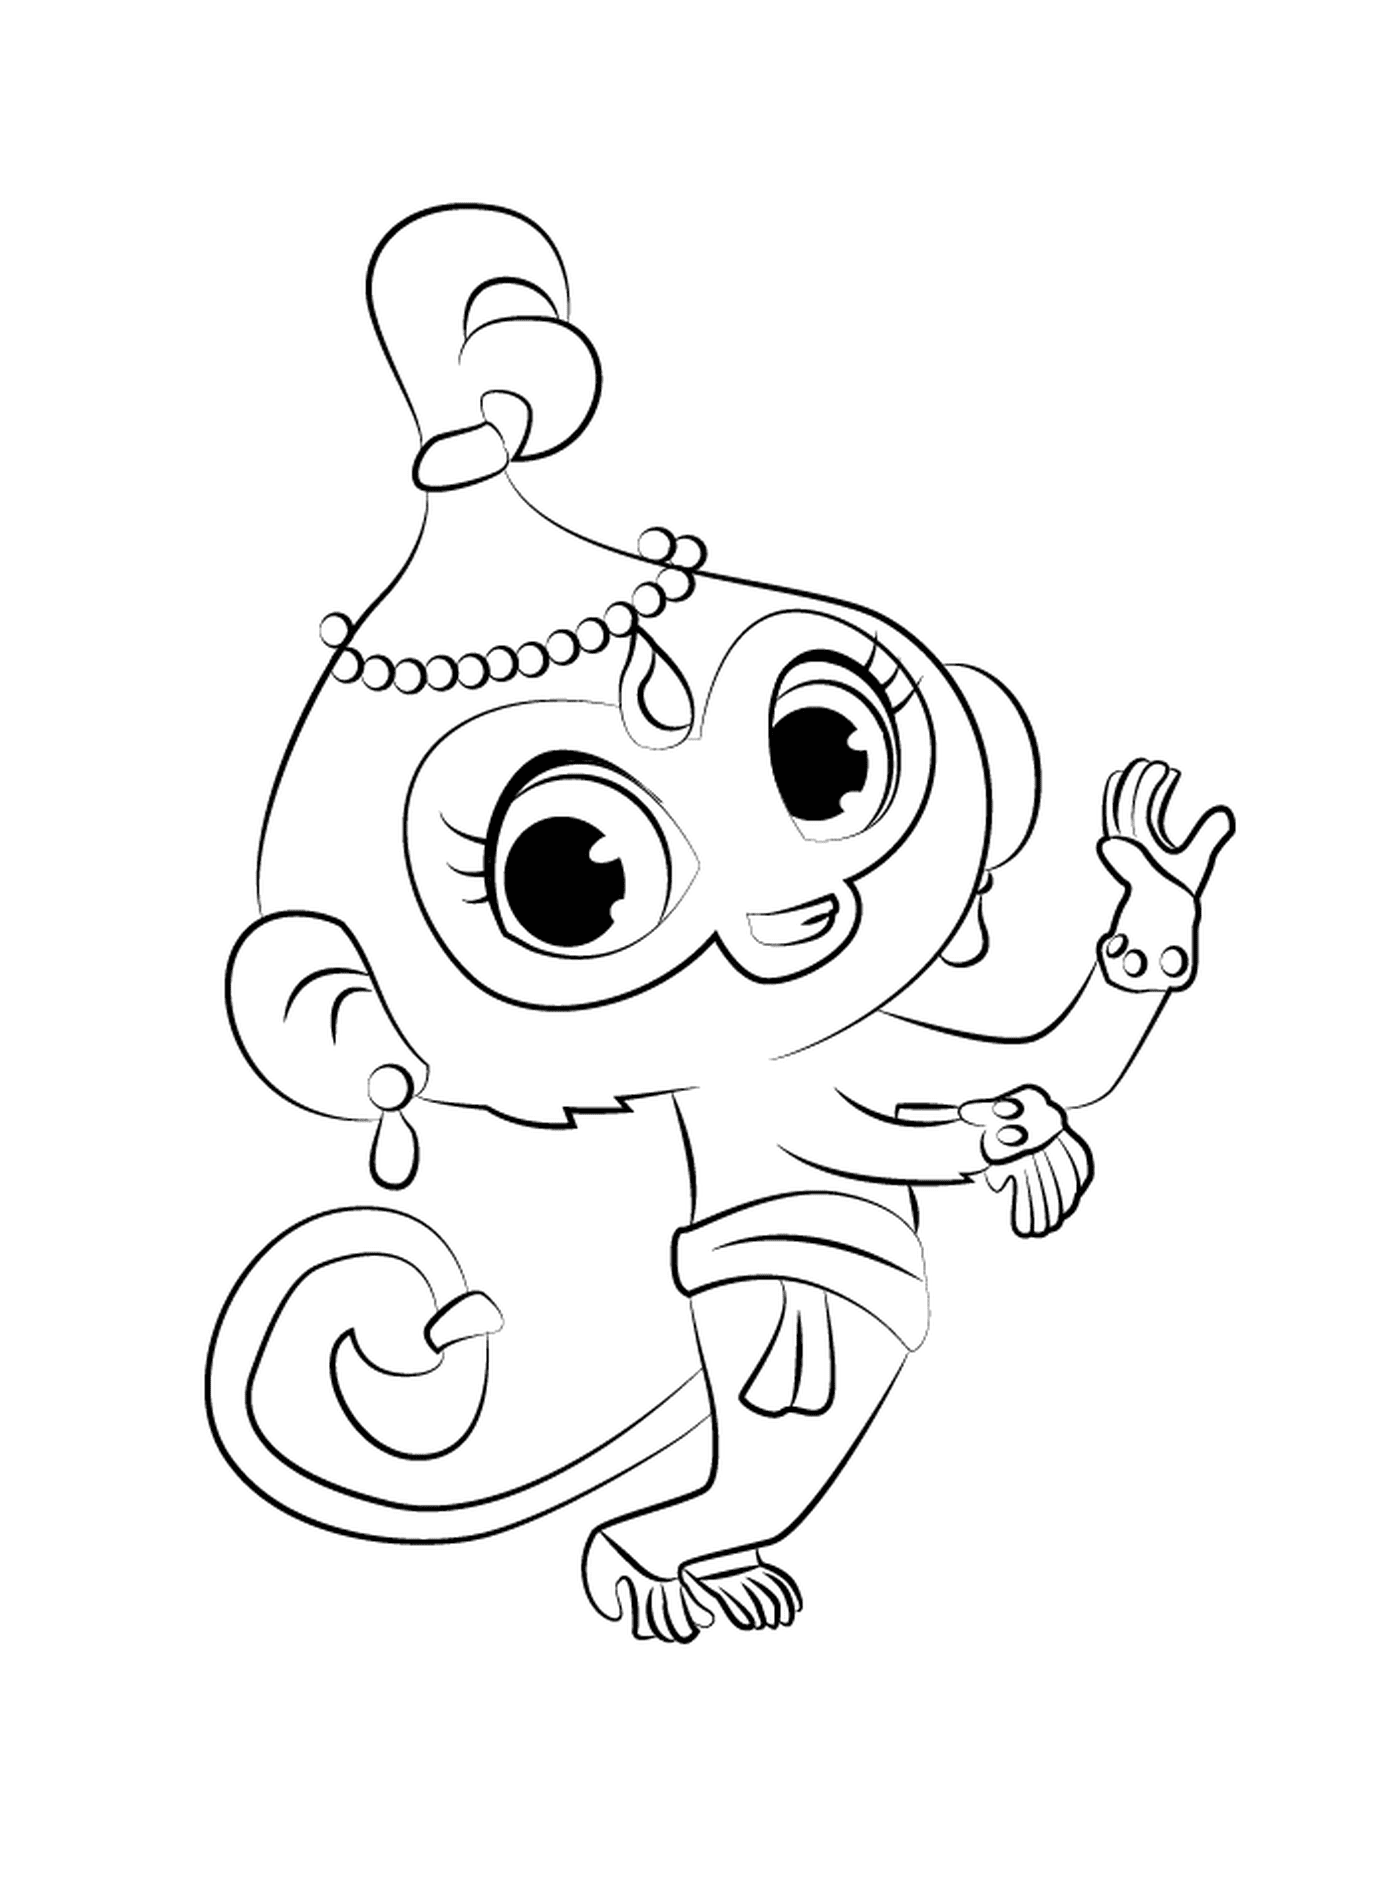 Drawing Tala from shimmer et shine